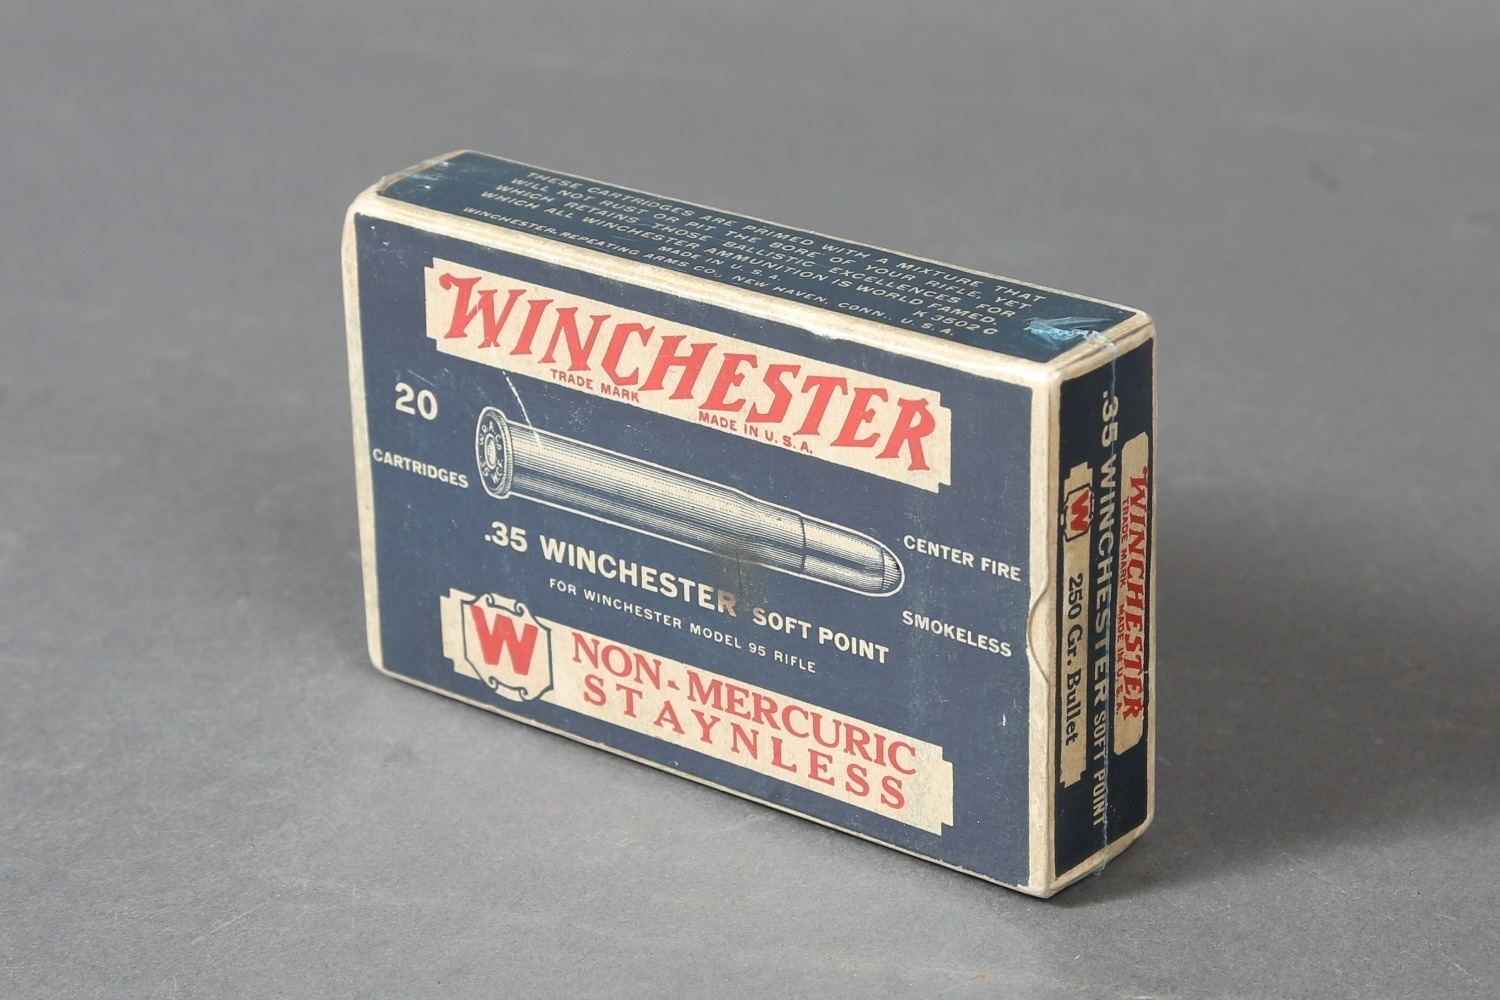 1 Bx Vintage Winchester .35 Win Ammo